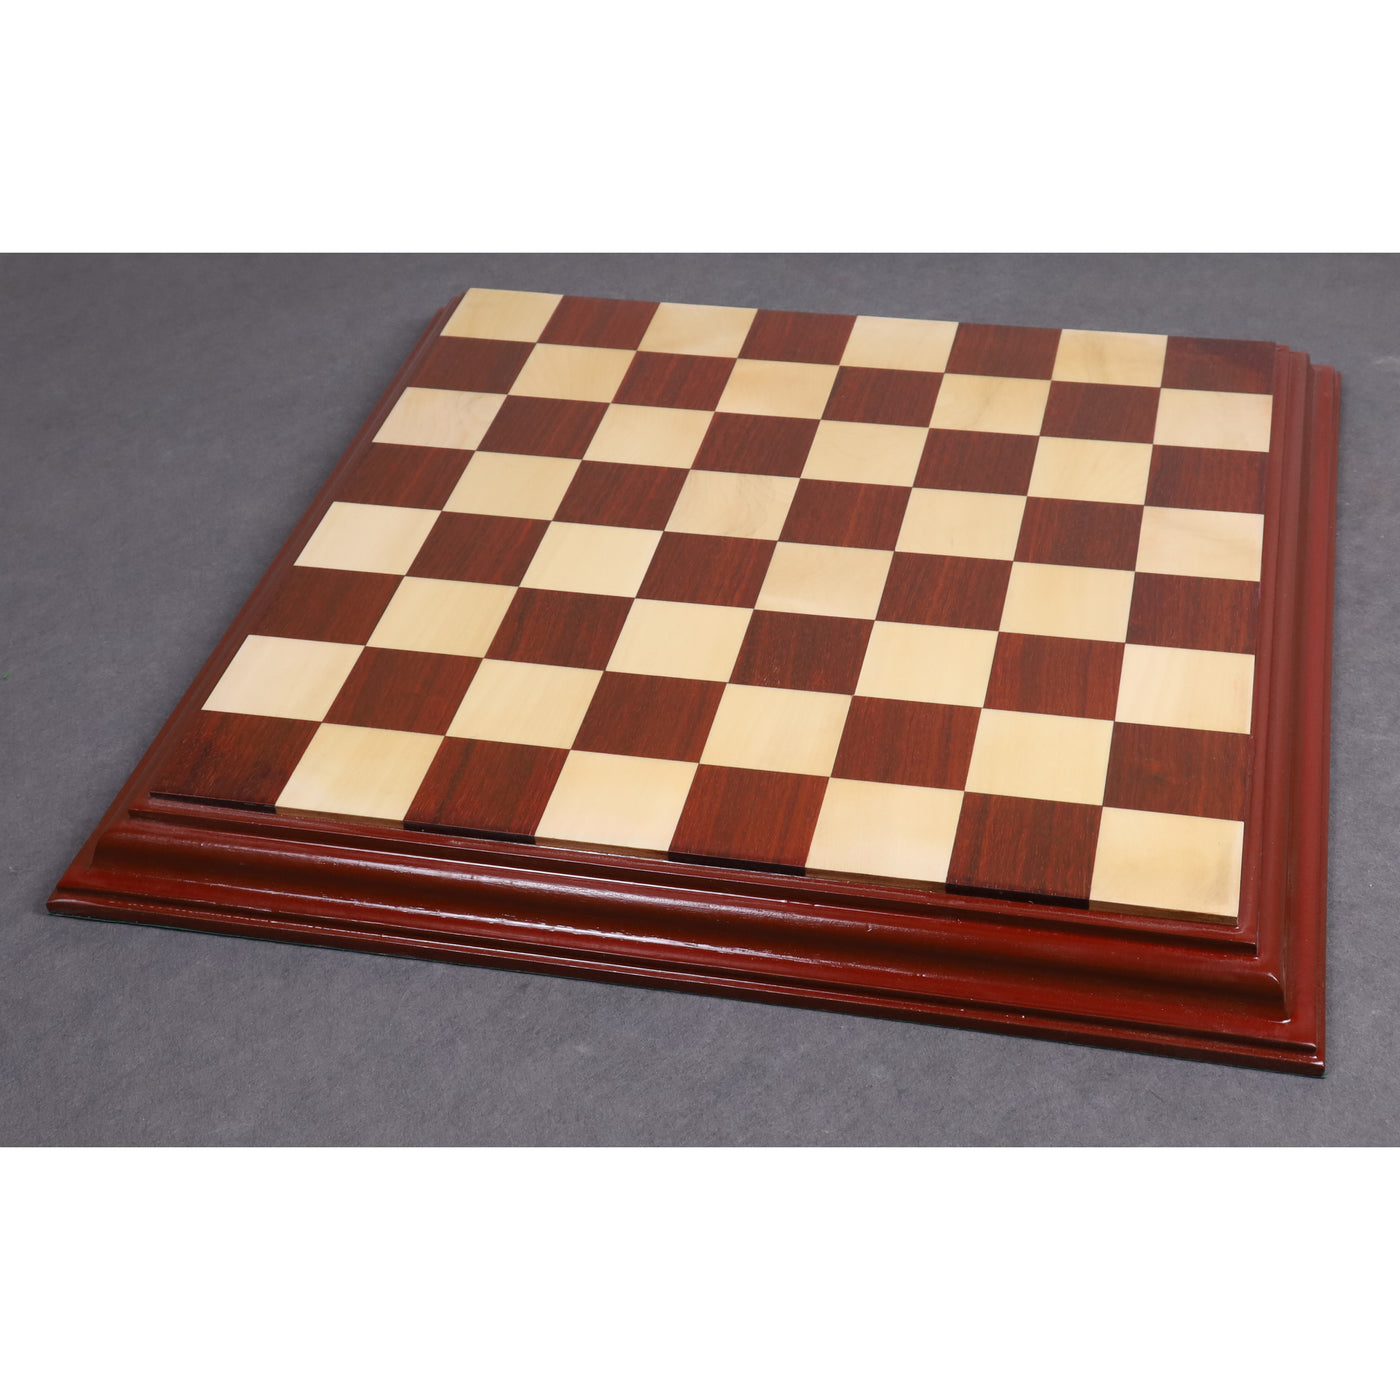 4.5″ Carvers’ Art Luxury Chess Budrose Wood Pieces with 21" Bud Rosewood & Maple Wood Luxury Chessboard with Carved Border and Leatherette Coffer Storage Box